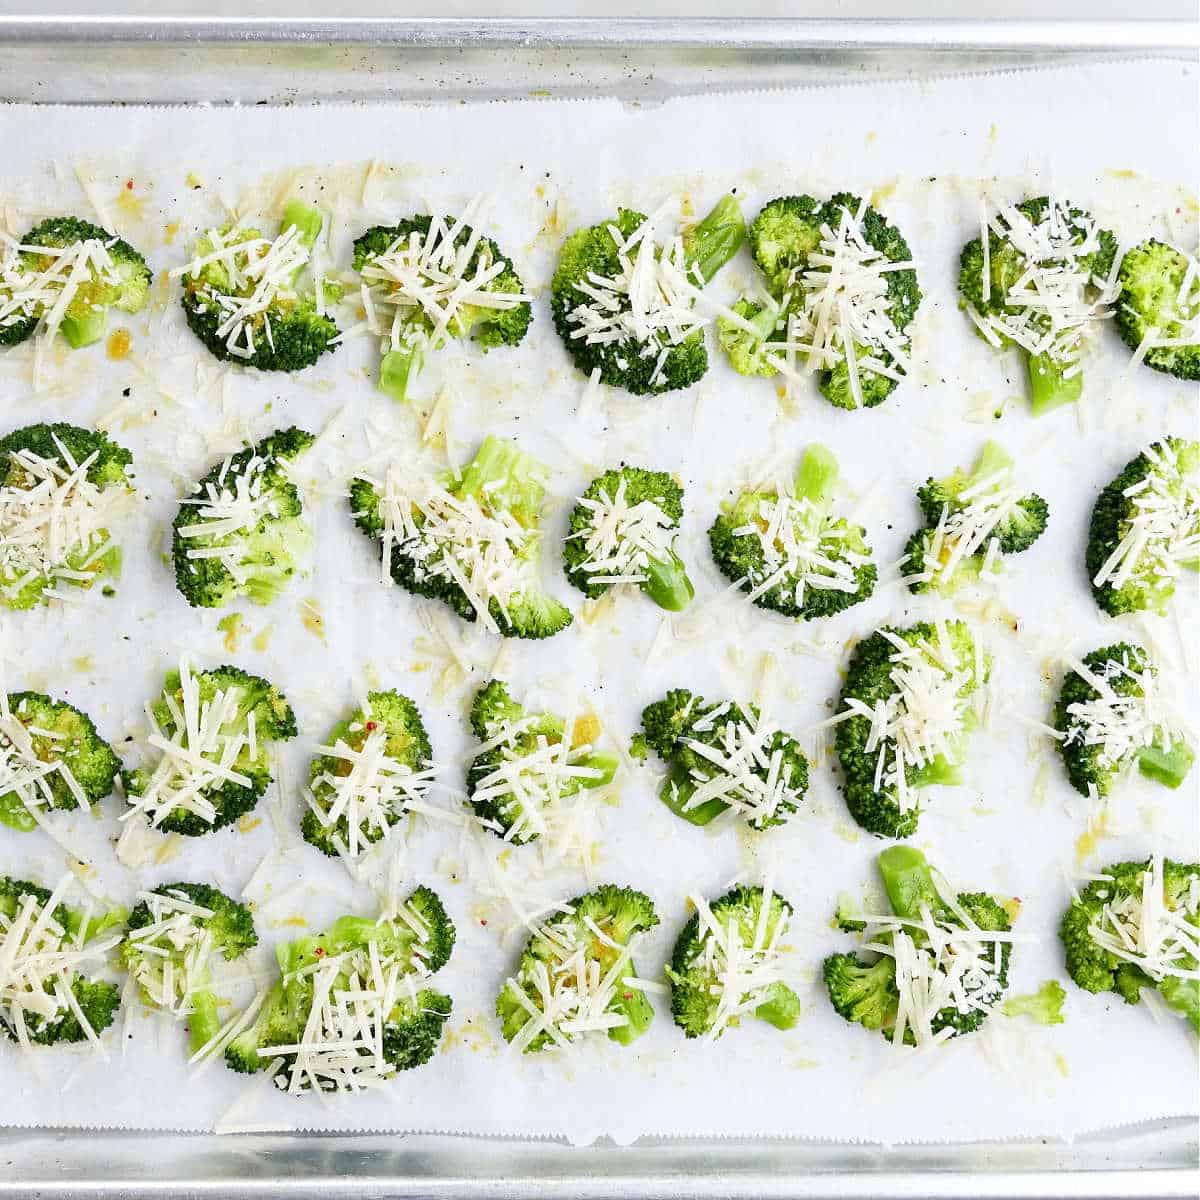 smashed broccoli pieces topped with parmesan cheese on a baking sheet before going in the oven